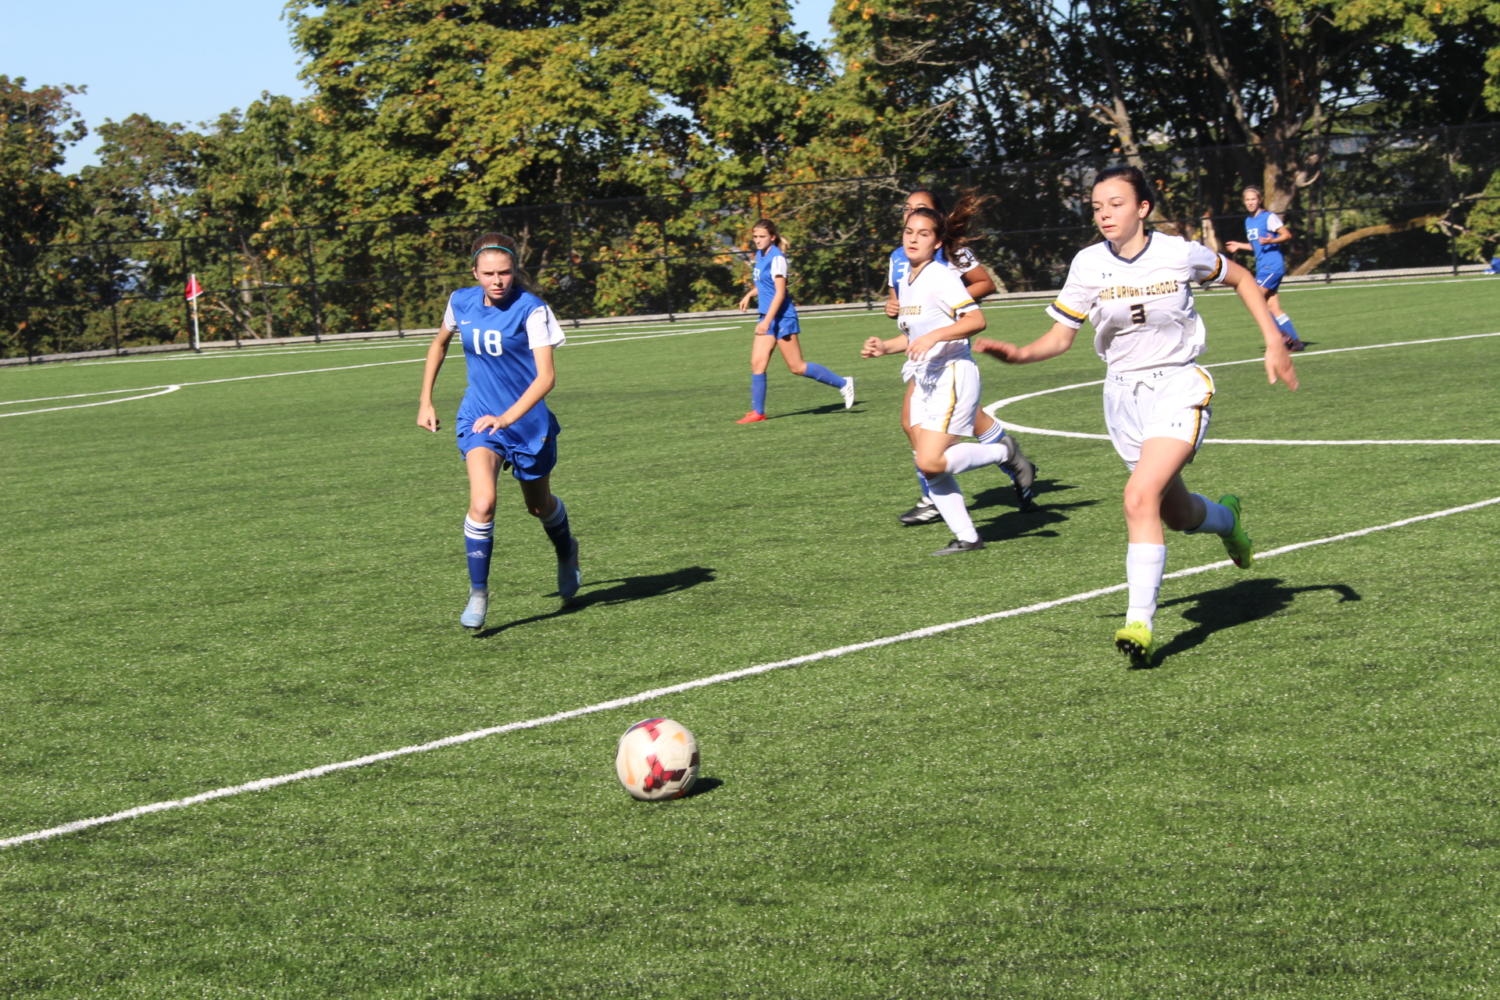 Senior Mari Beaurpere chases down a ball in the soccer game against Stadium.